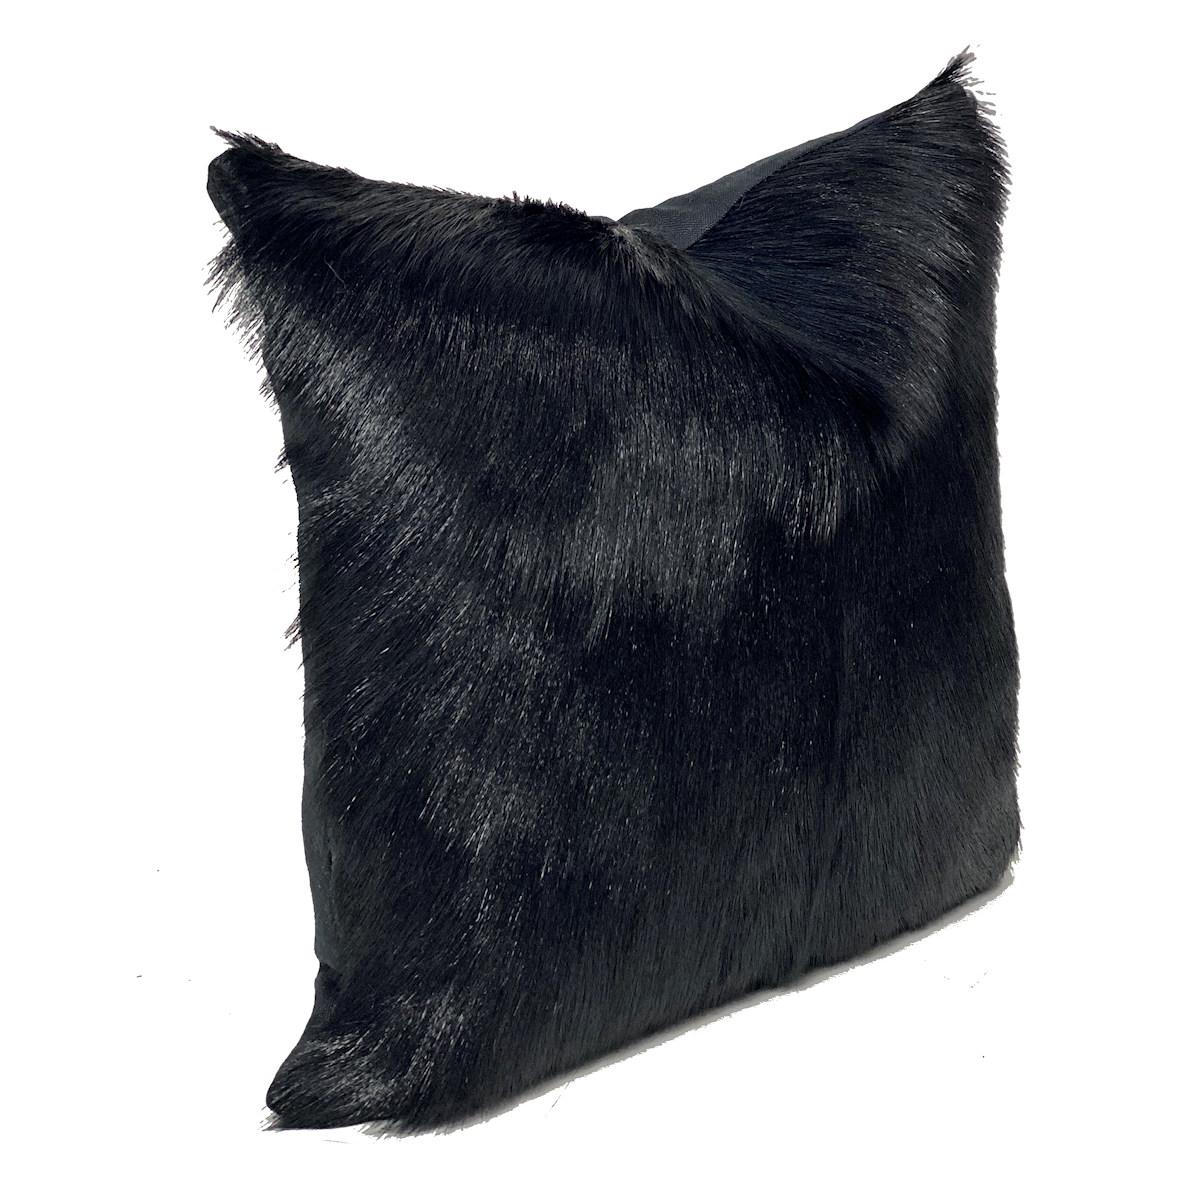 Inject refined and contemporary textures to your space with this super seek black fur pillow hand-crafted from genuine goat fur.

With irresistible and lustrous black fur, makes each goat hair pillow remarkably beautiful, preserving the natural